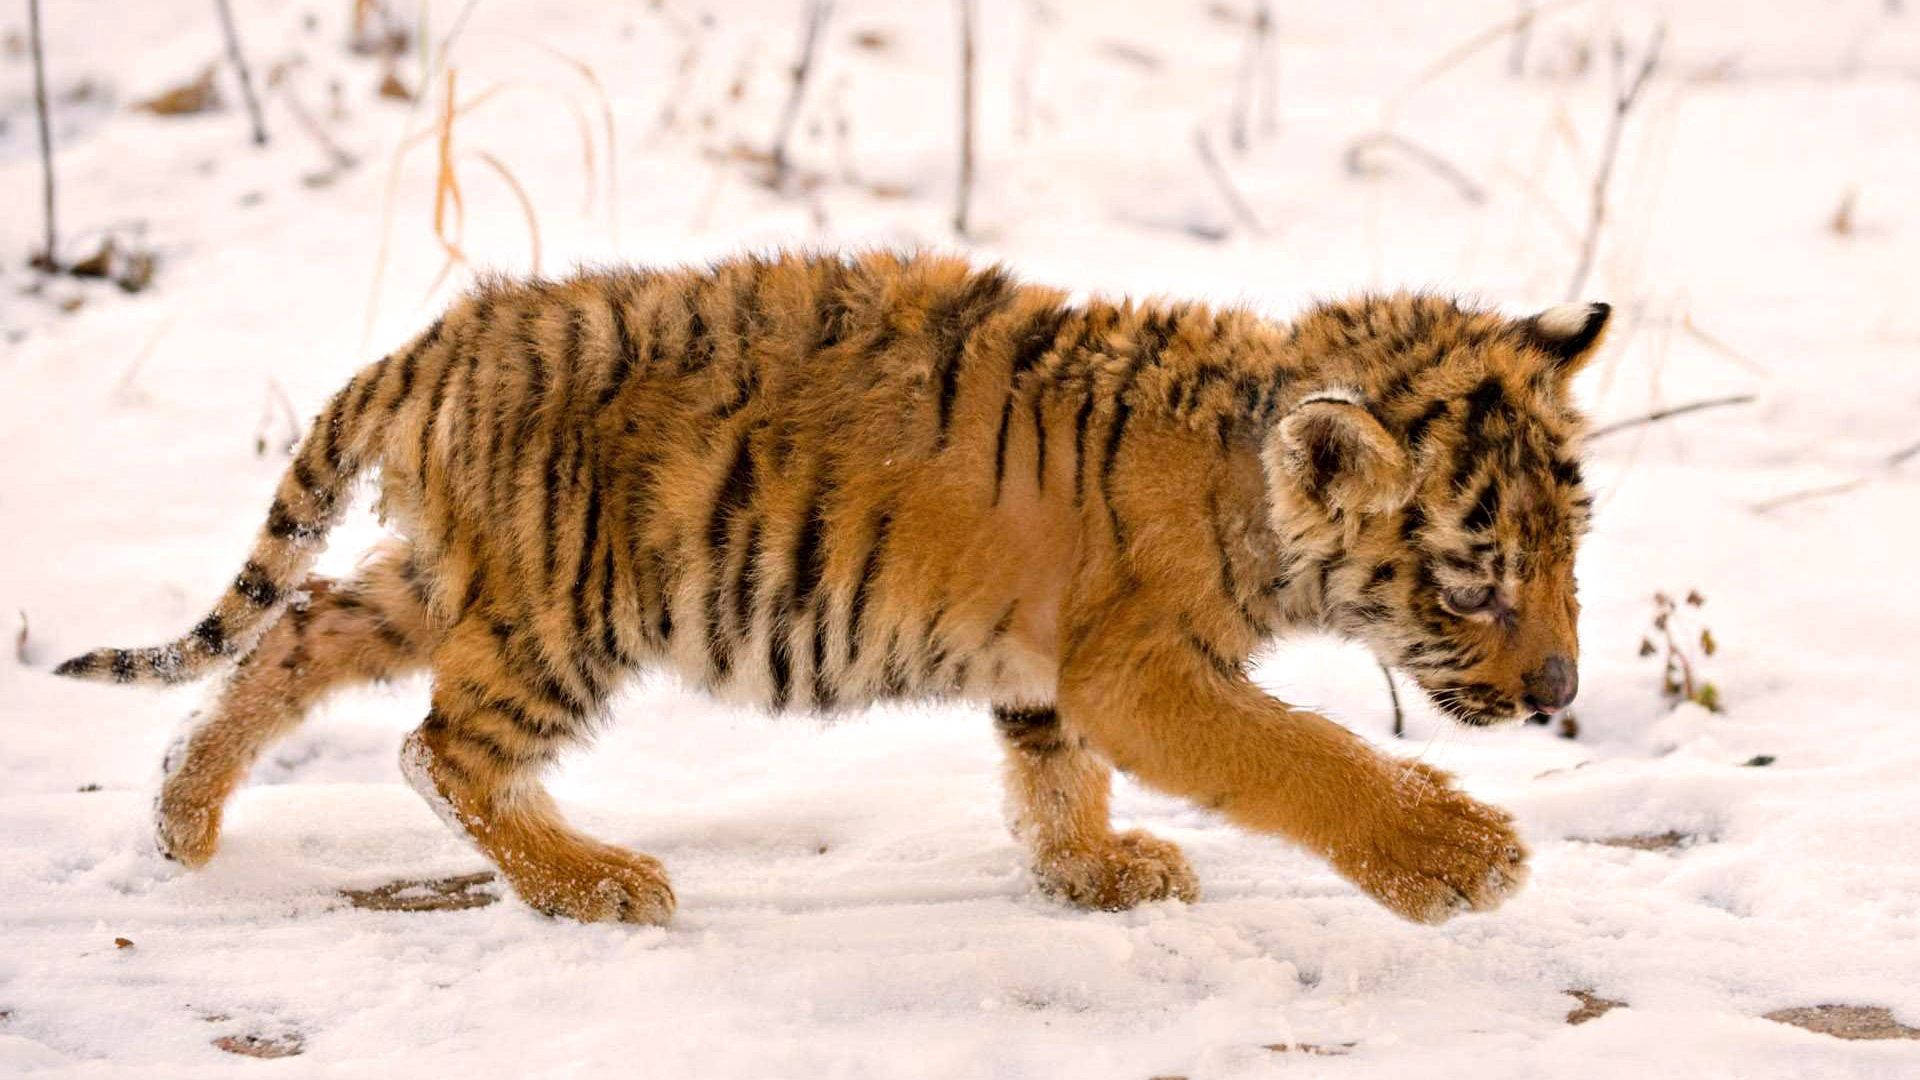 Little Cub Eager to Enjoy Its First Snow Wallpaper